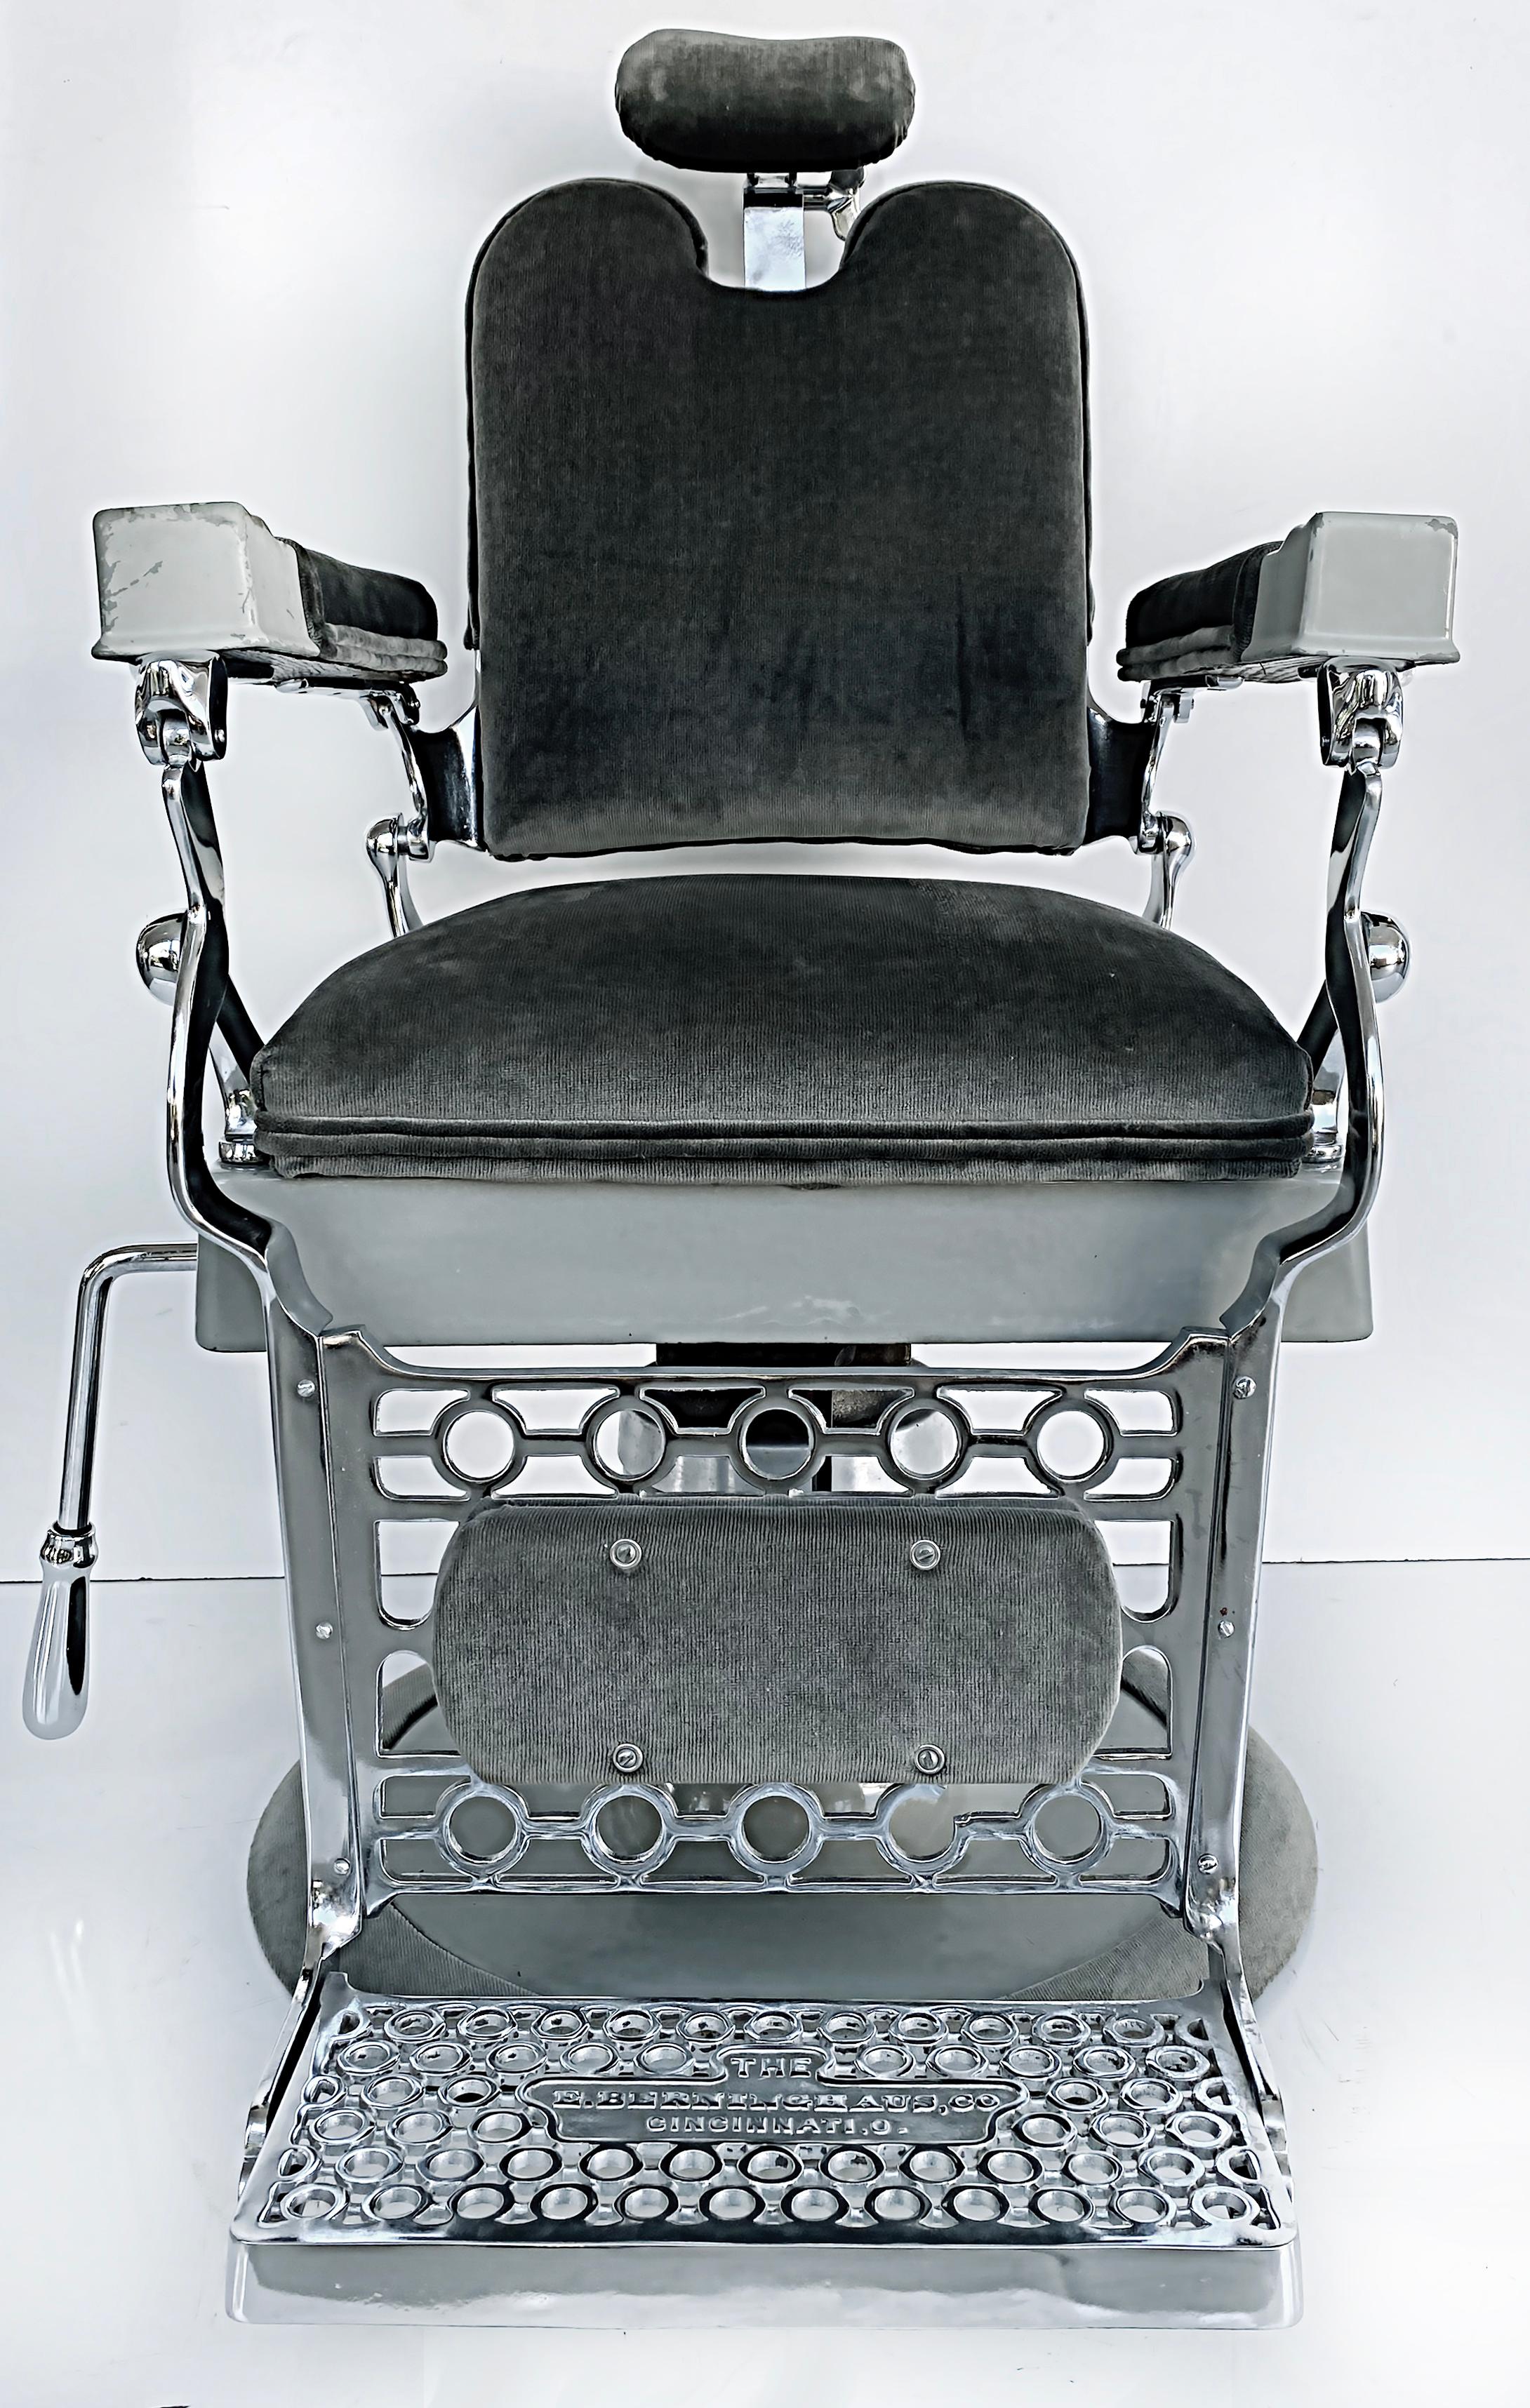 American Antique Barber chair by Eugene Berninghaus Co.

Offered for sale is an antique early 20th -century barber chair made by the Eugene Berninghaus Co.. Named to be the first barber chair manufacturer in the United States, the Eugene Berninghaus